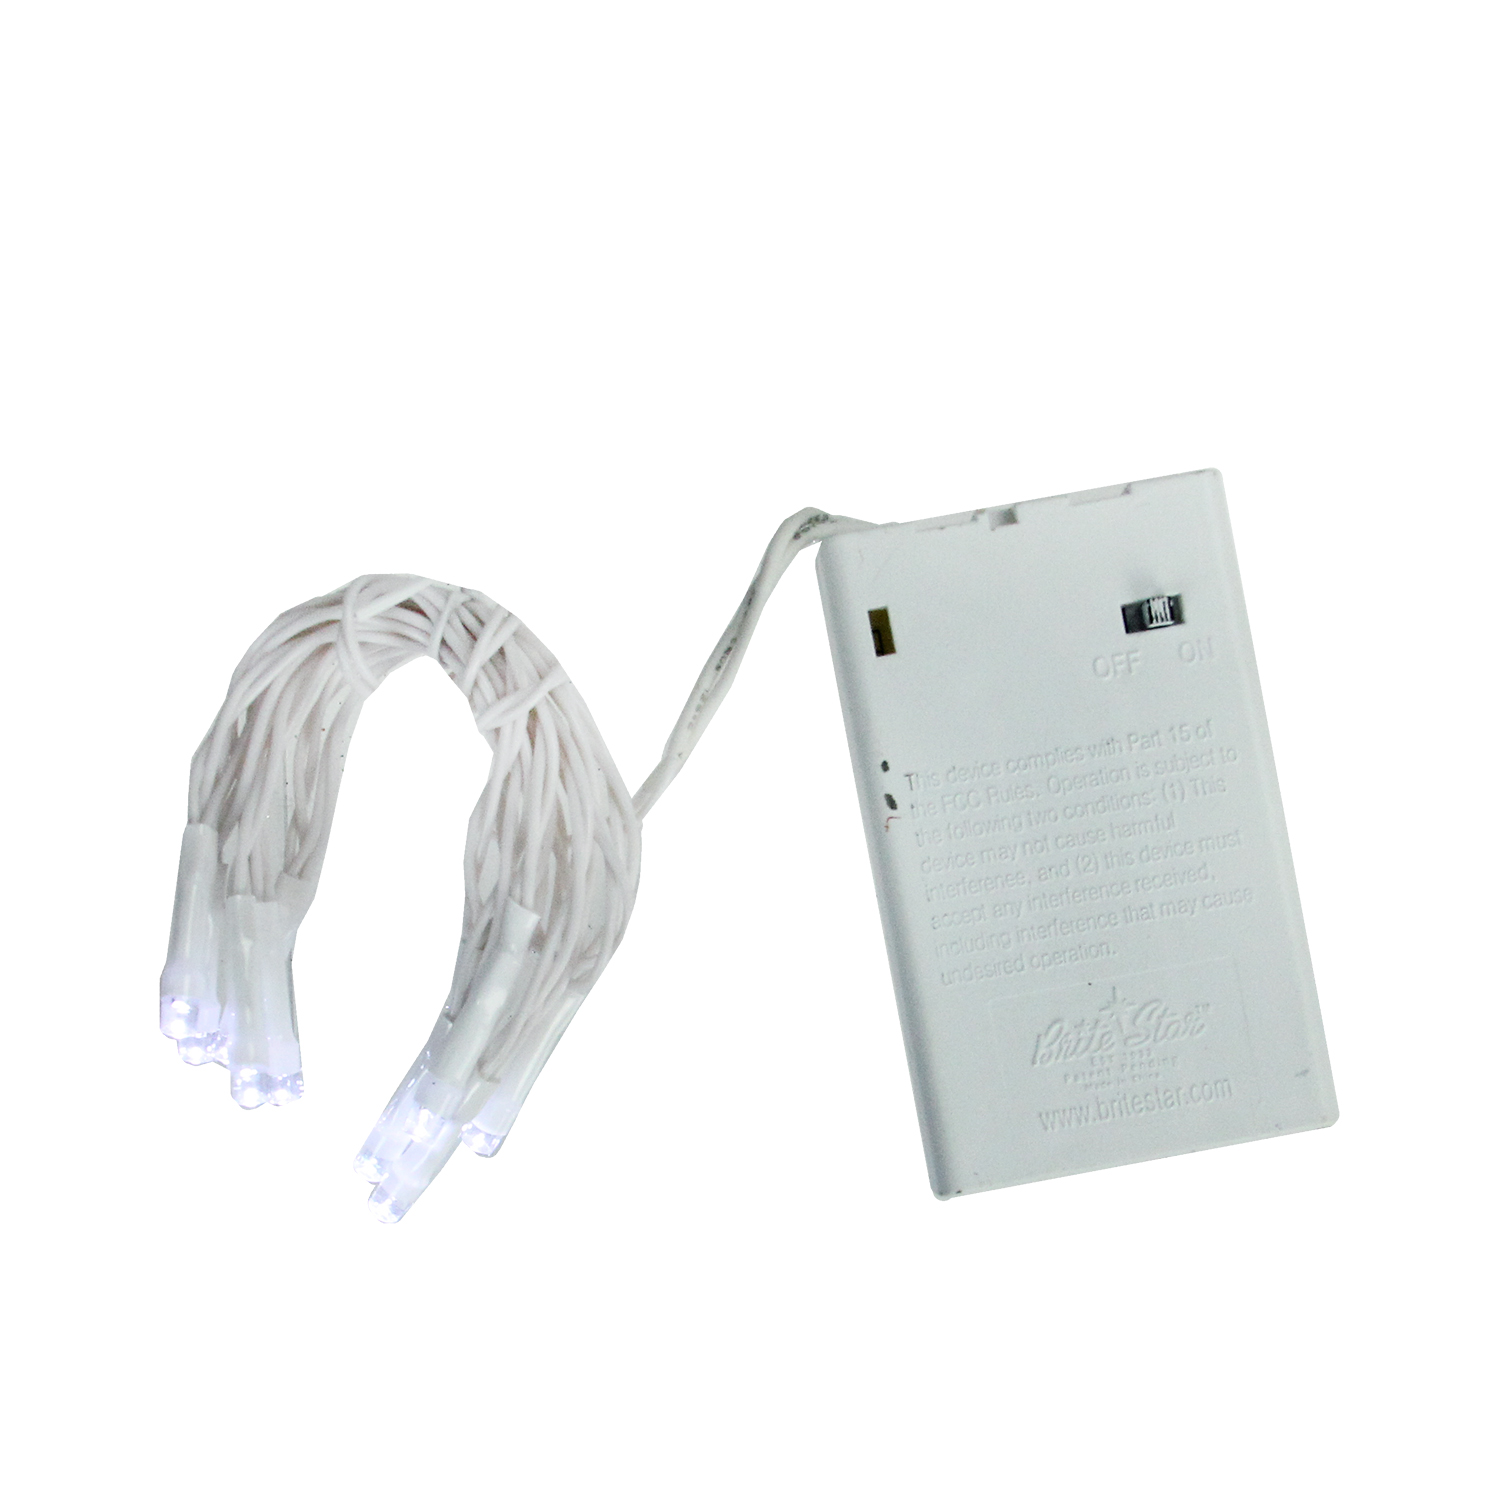 10 Battery Operated White LED Wide Angle Christmas Lights - 3 ft White Wire - image 2 of 3